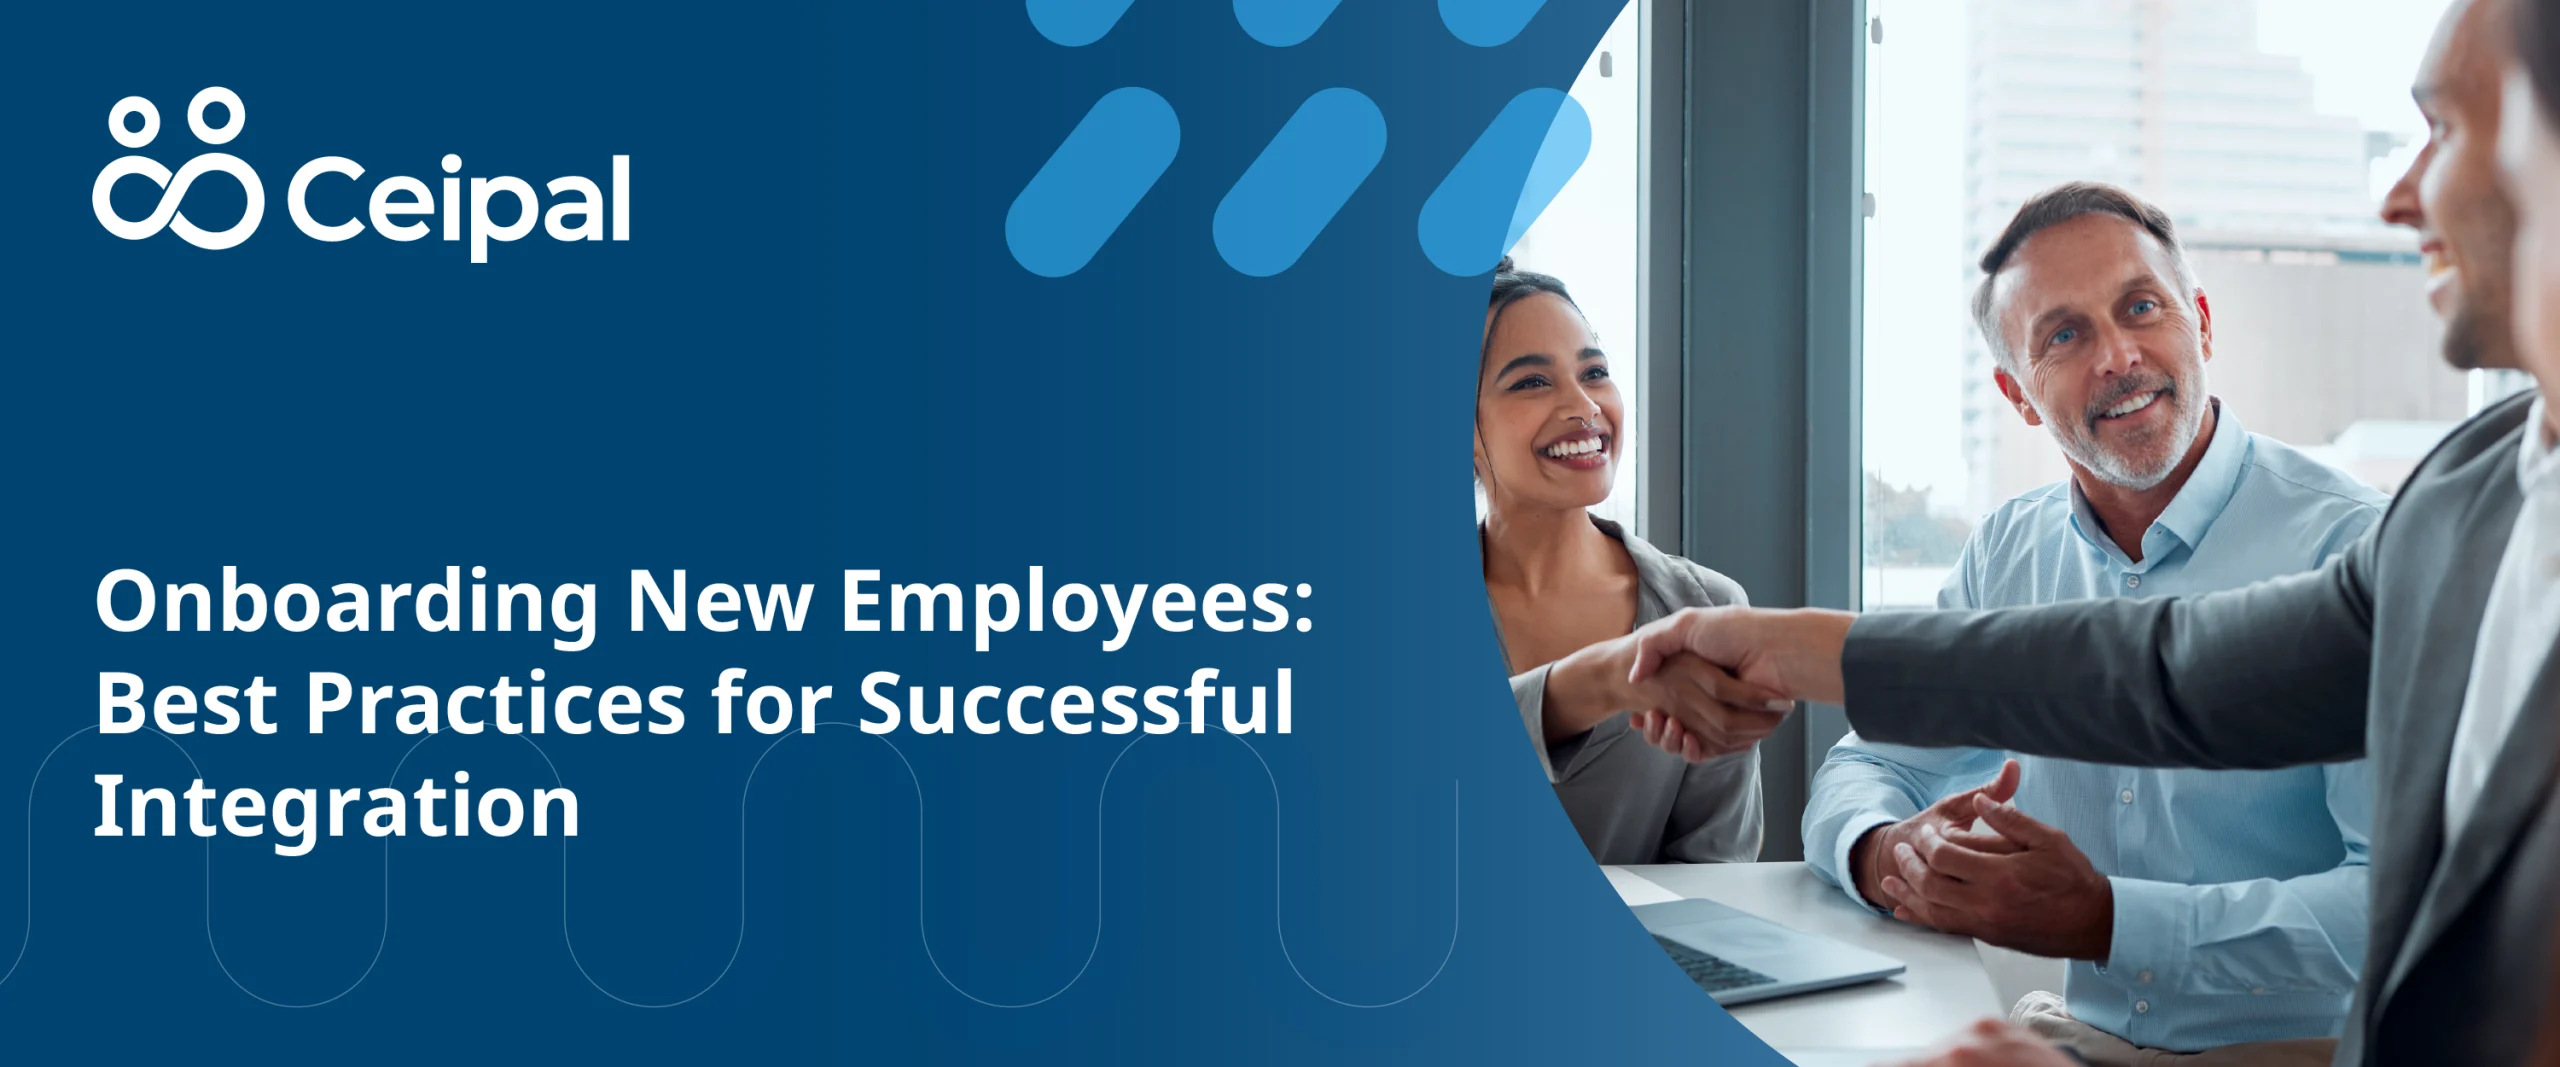 Onboarding New Employees: Best Practices for Successful Integration